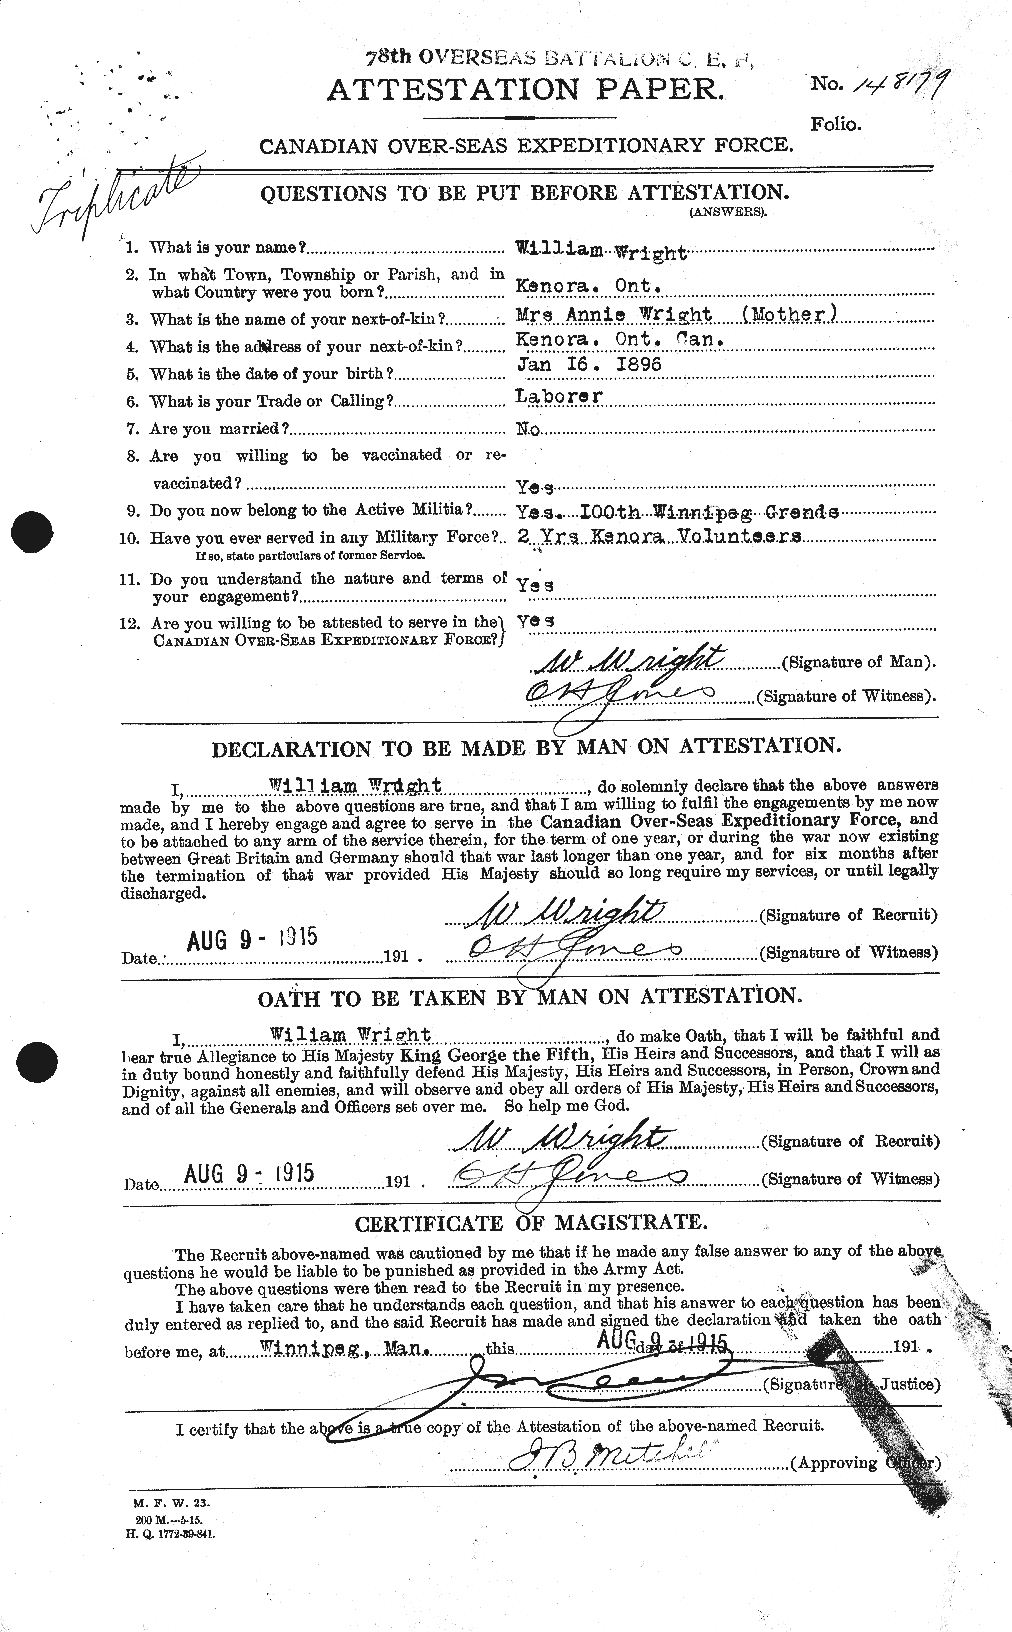 Personnel Records of the First World War - CEF 688699a